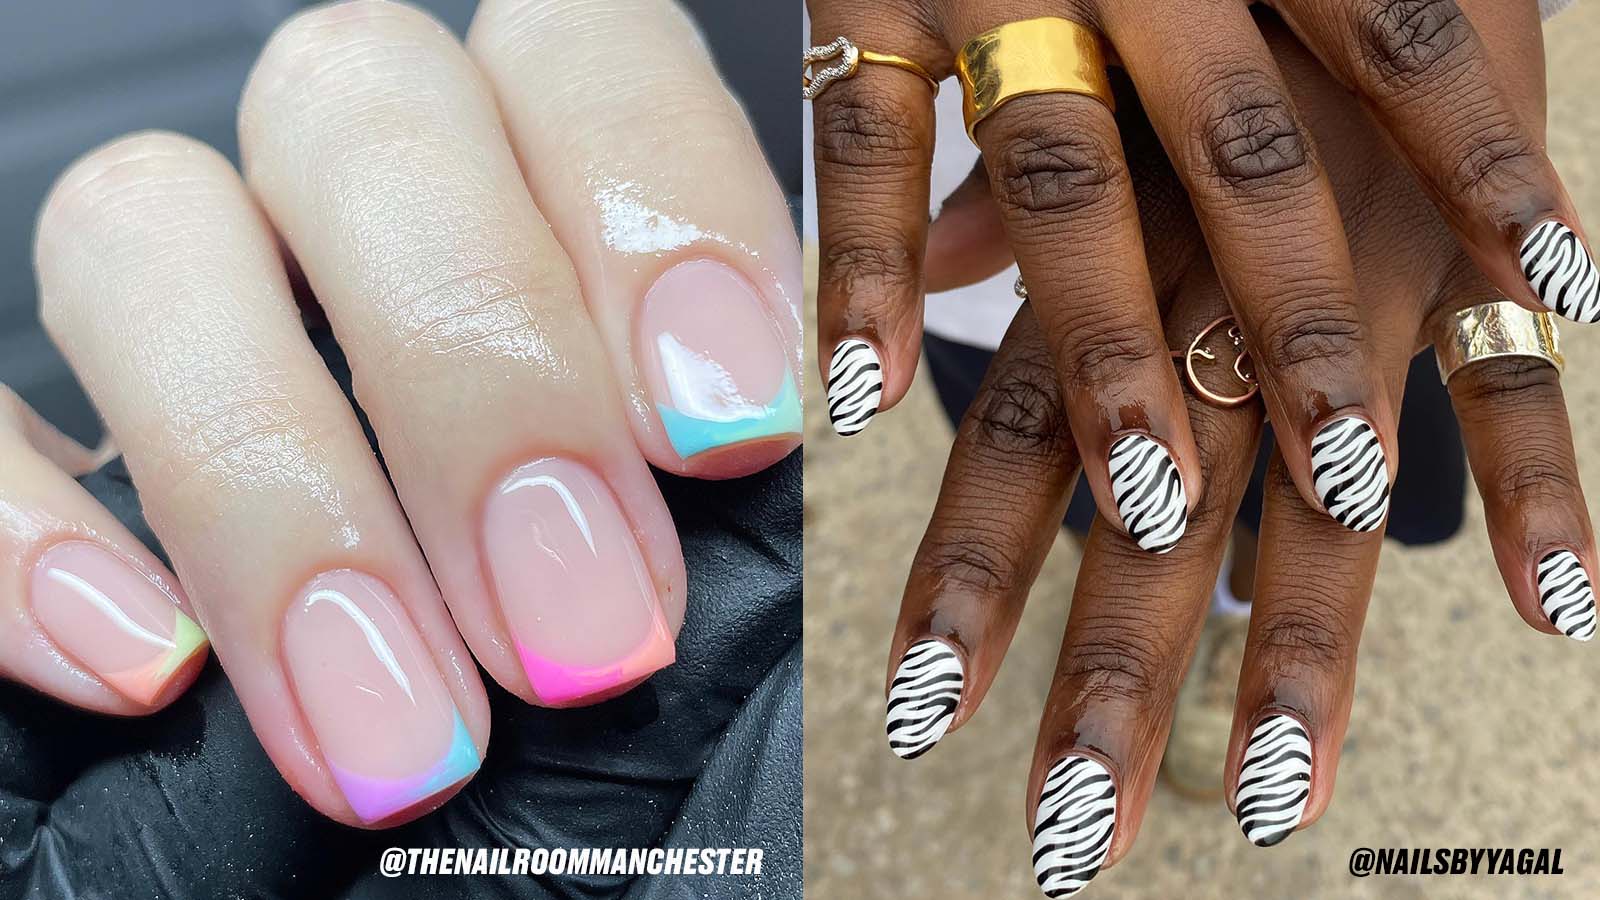 8. Celebrity nail artists share their tips for perfecting pointy nail designs like Rihanna - wide 7